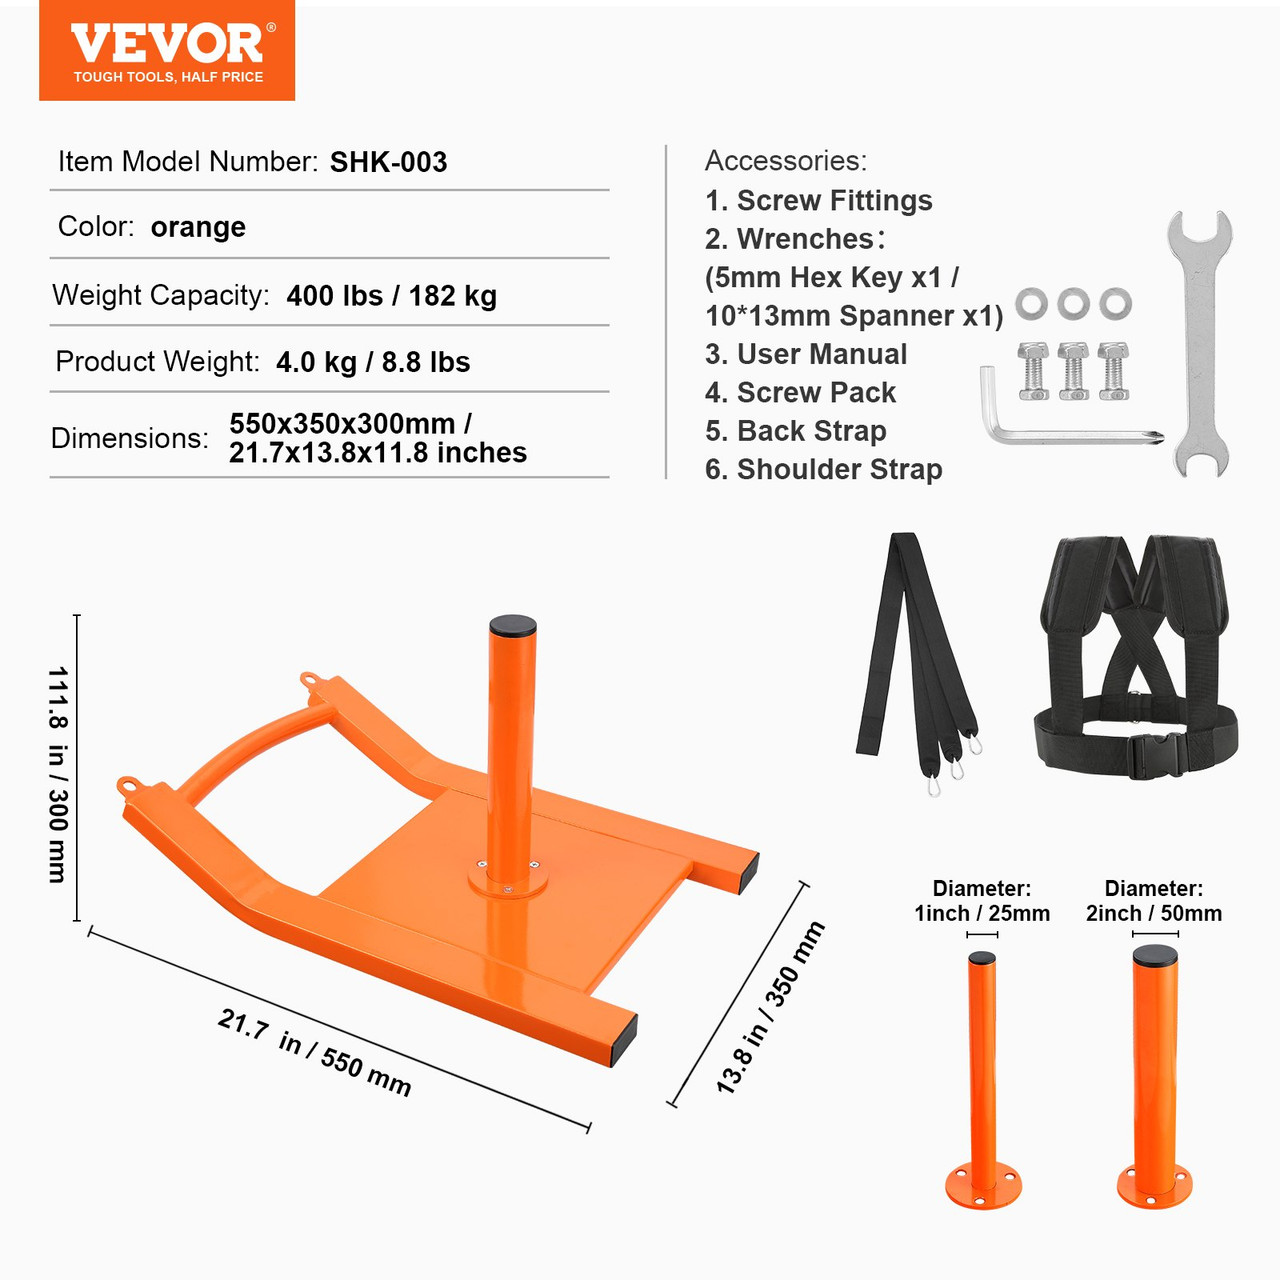 VEVOR Weight Training Pull Sled, Fitness Strength Speed Training Sled, Steel Power Sled Workout Equipment for Athletic Exercise and Speed Improvement, Suitable for 1" & 2" Weight Plate, Orange